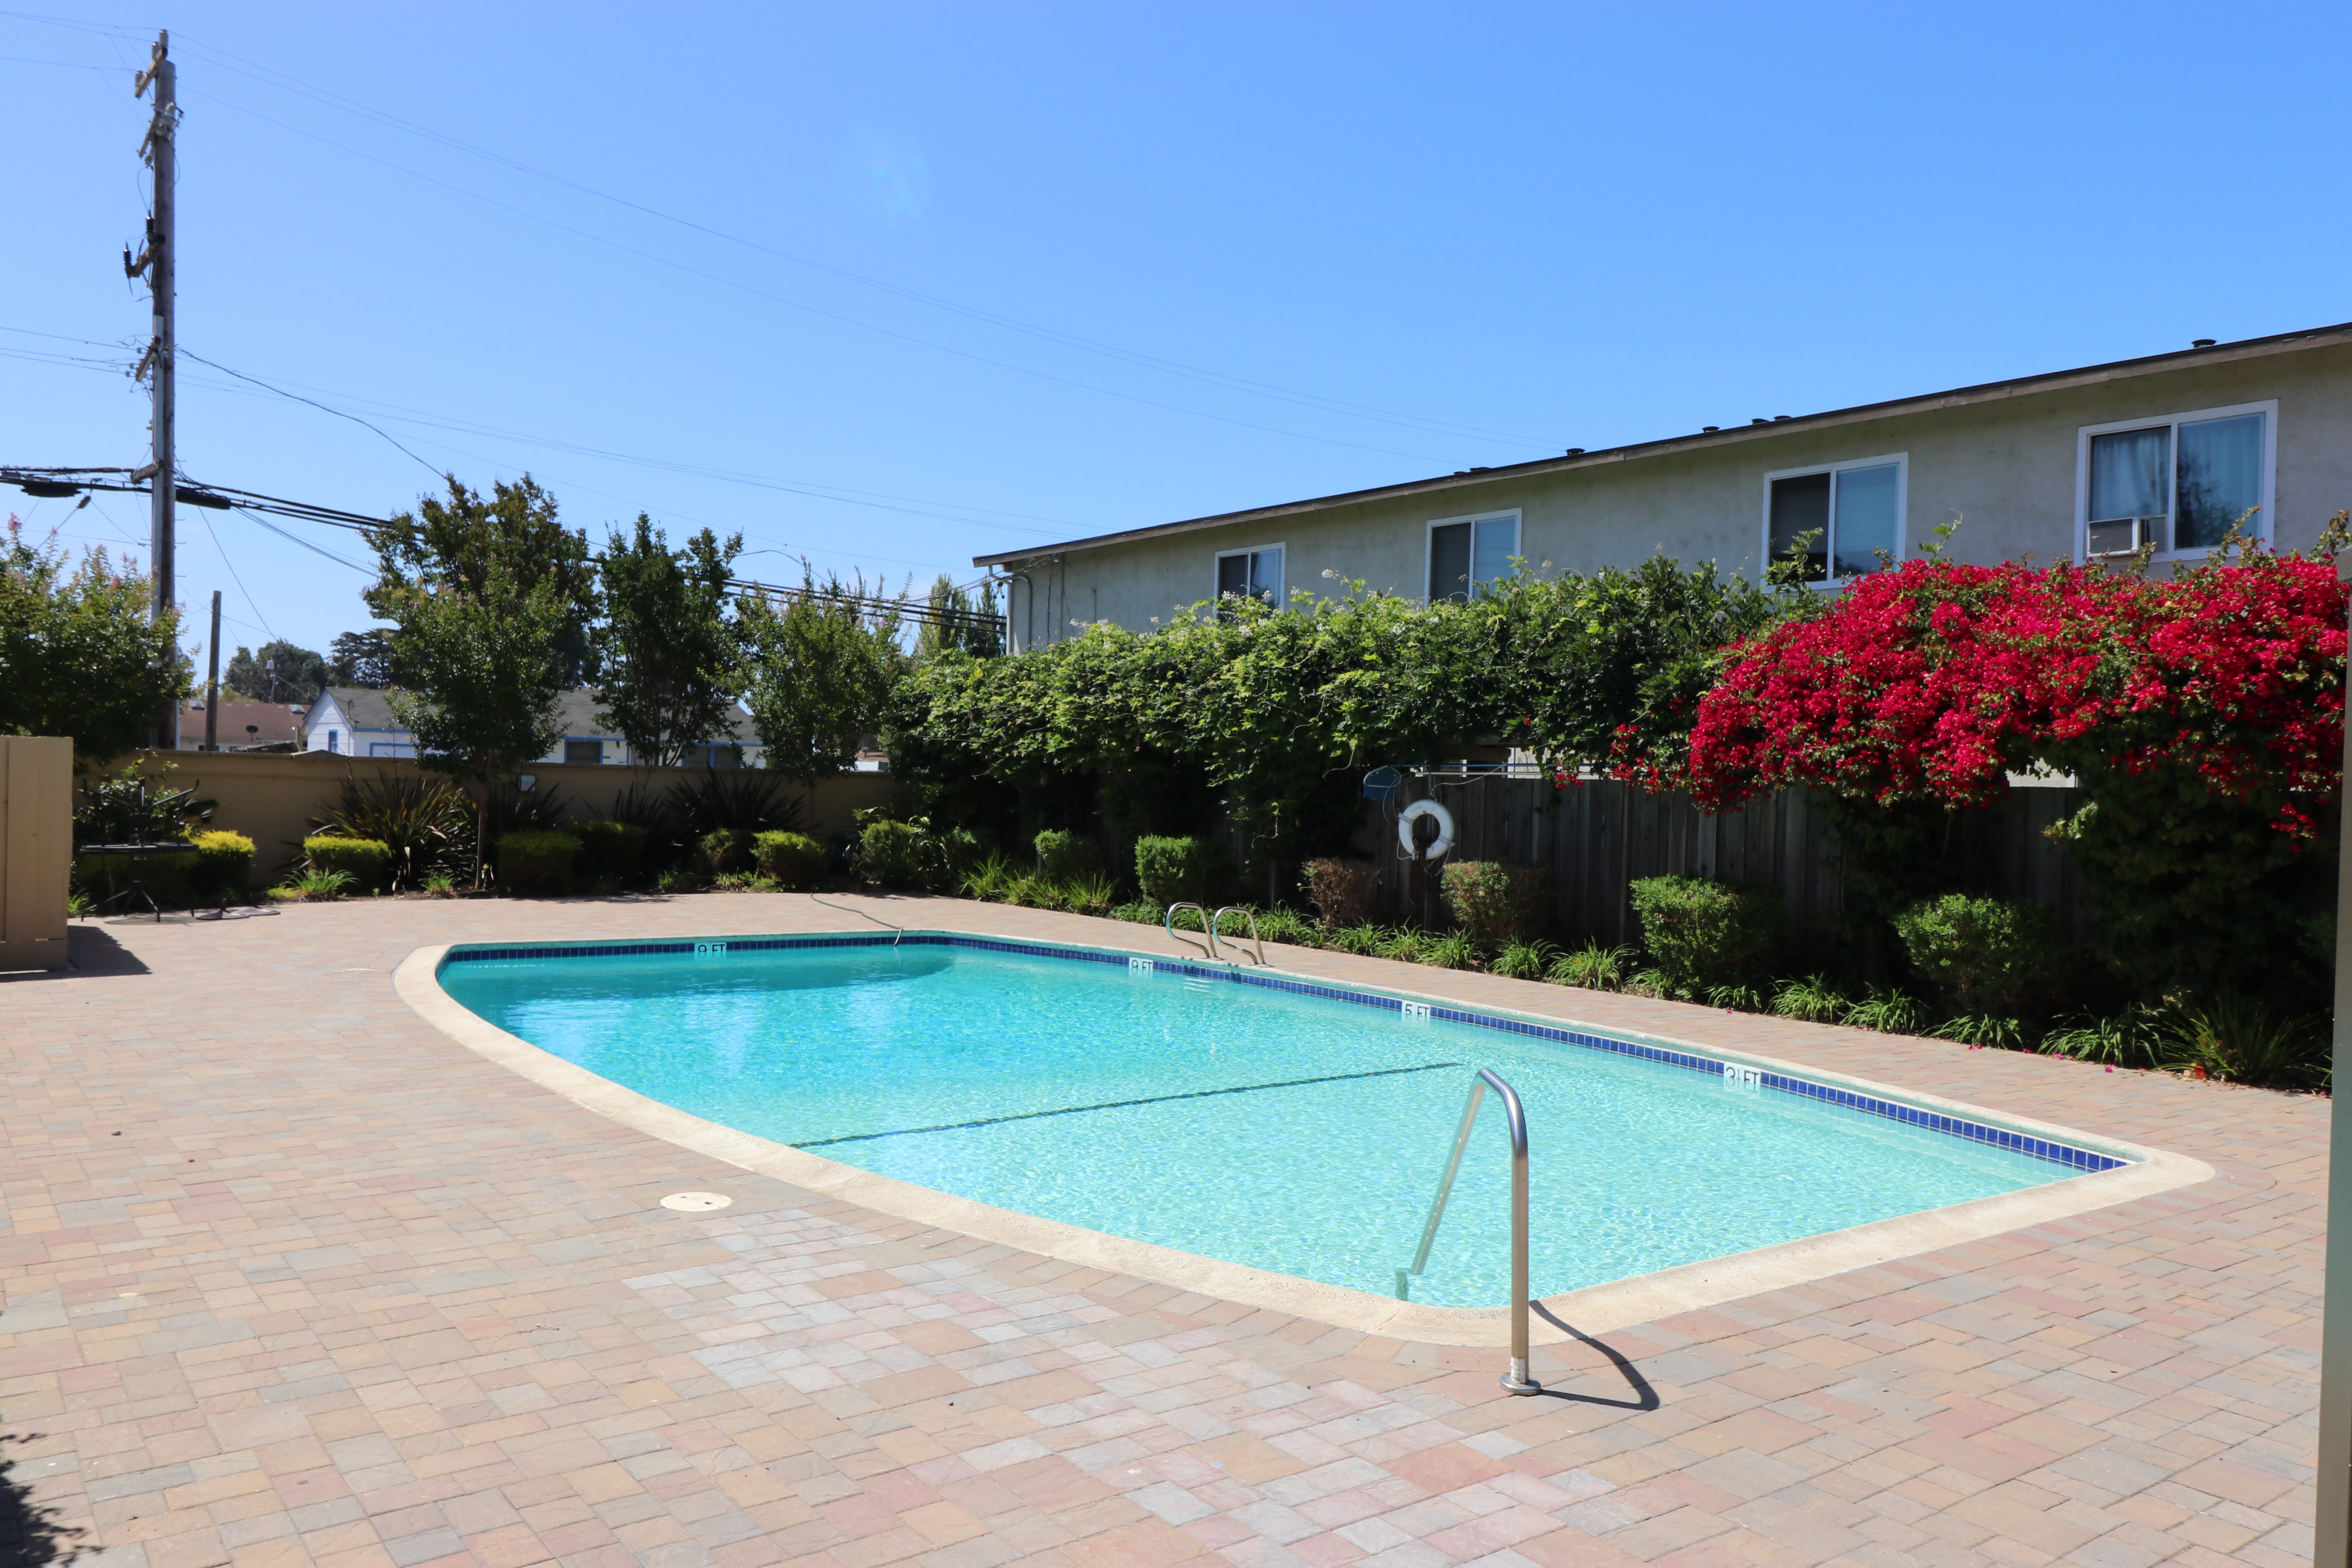 Chaise lounge chairs by the pool at Marina Plaza Apartment Homes in San Leandro, California